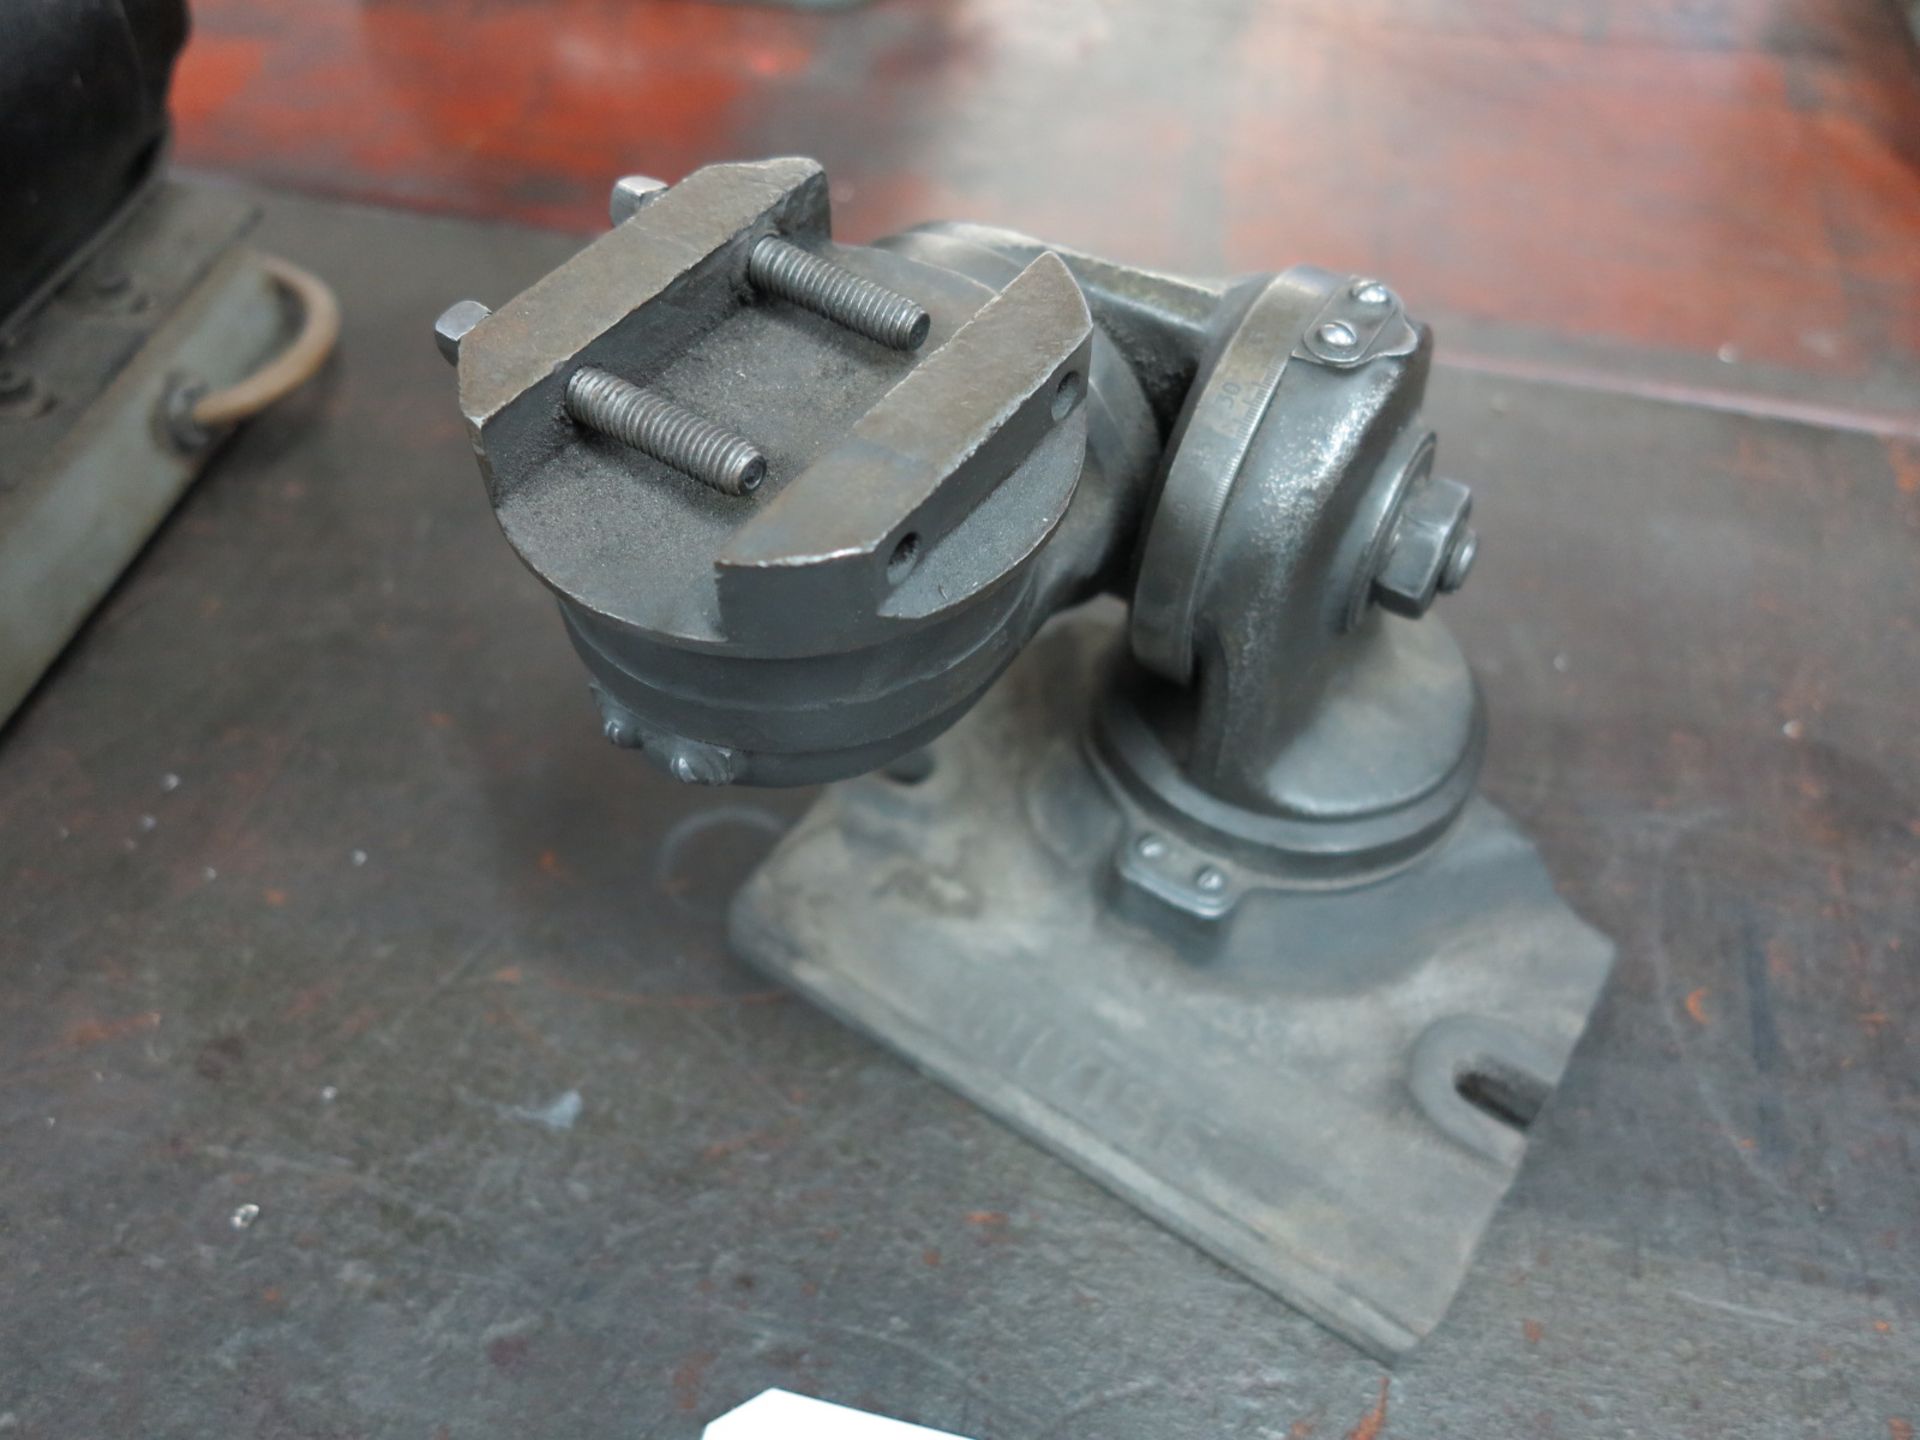 UNIVISE TOOL POST HOLDER - Image 2 of 2